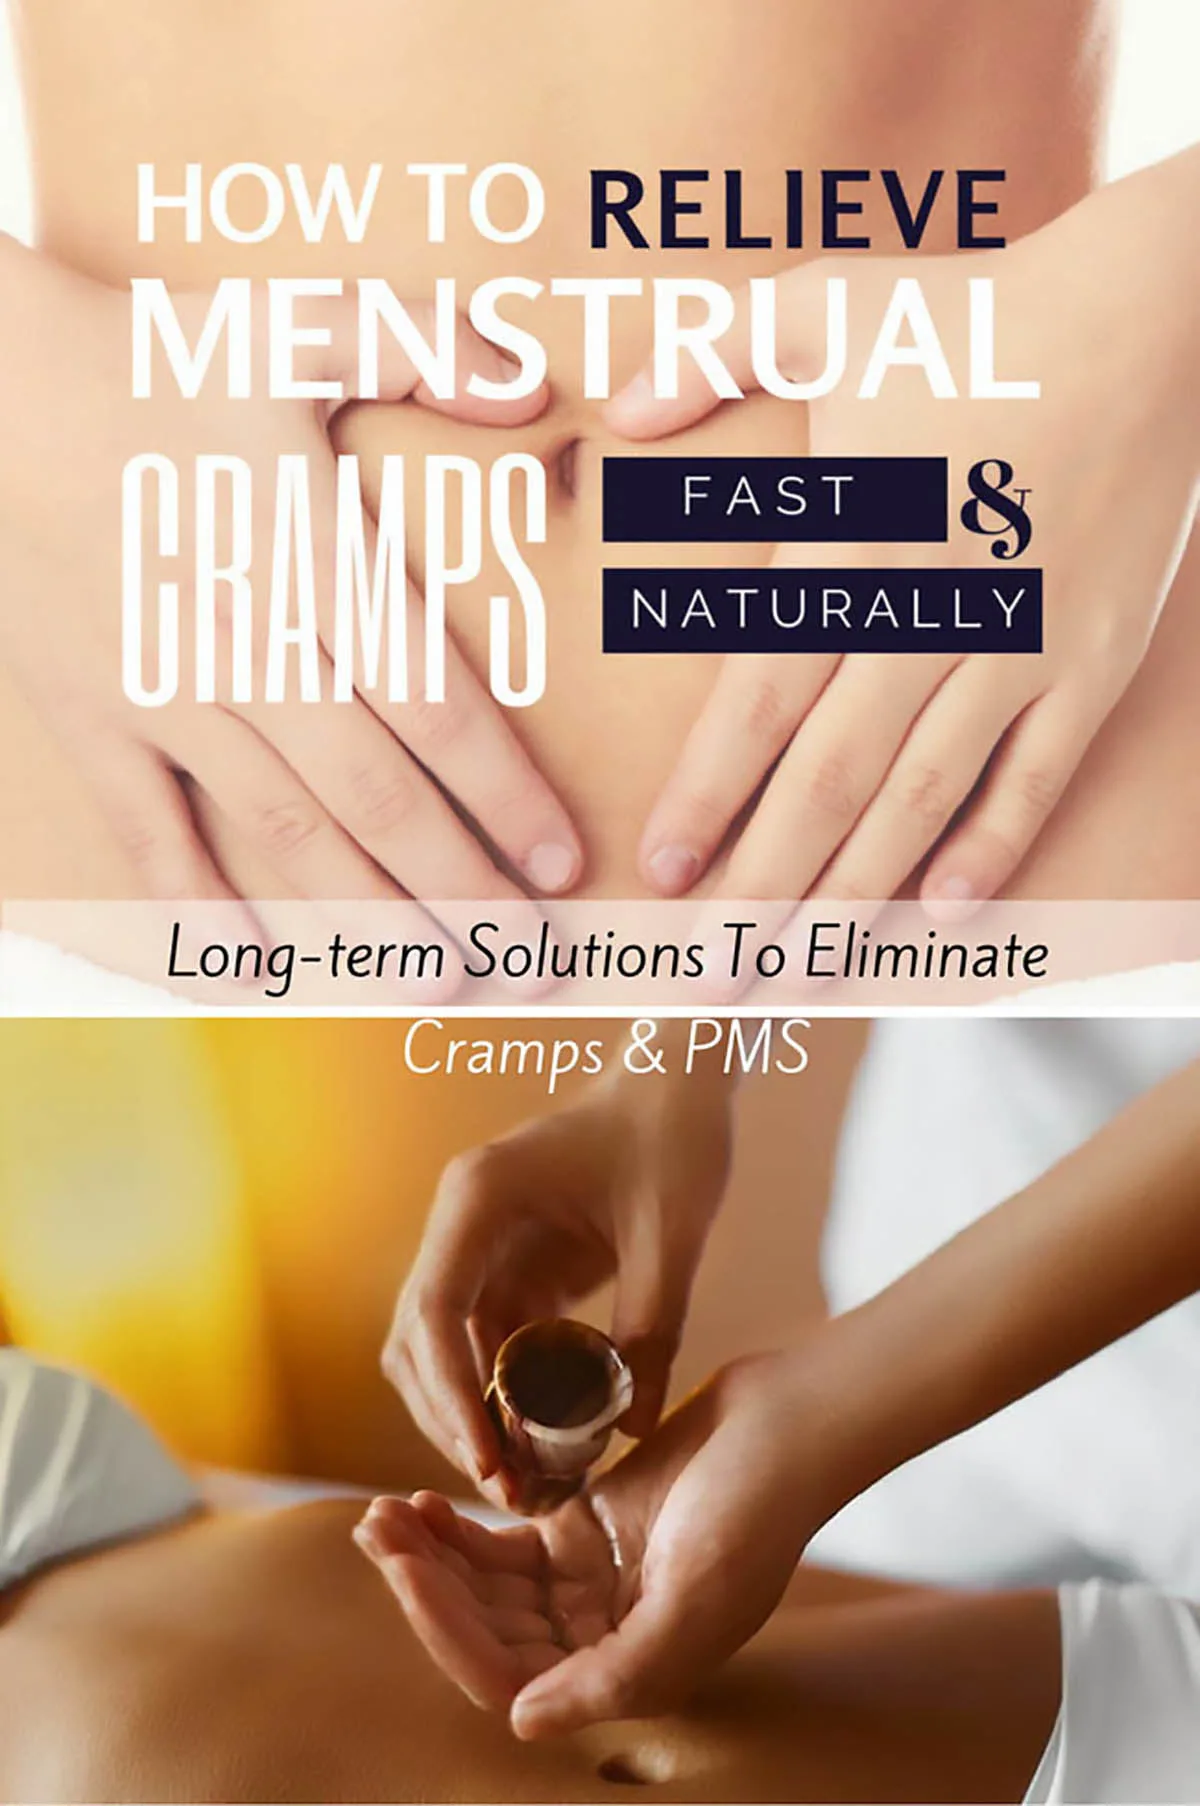 7 Reasons for Painful Periods and Menstrual Cramps